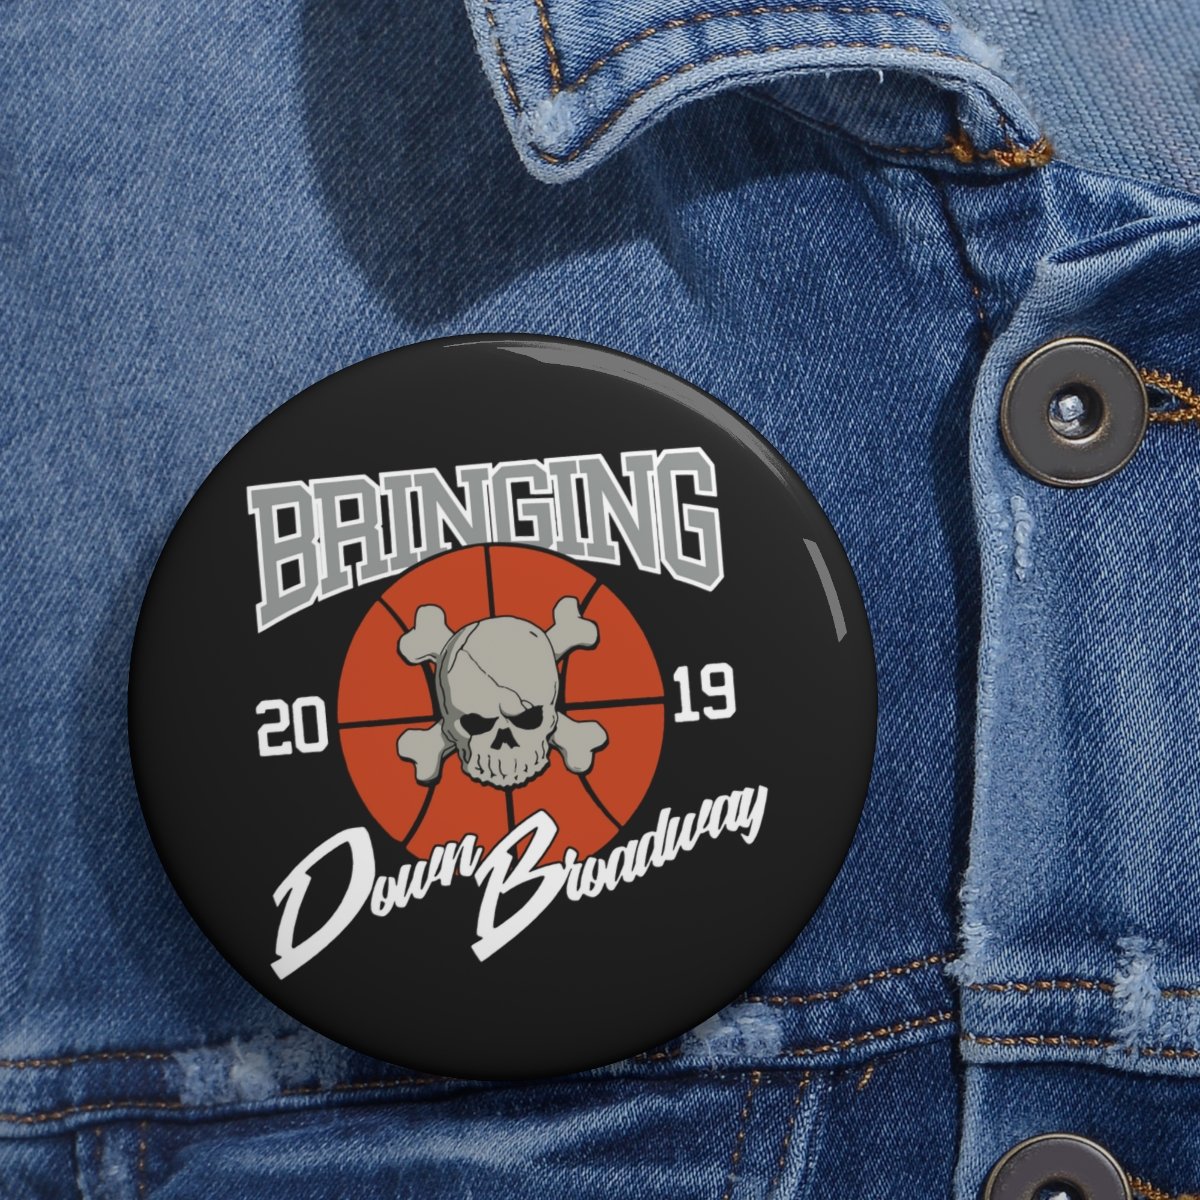 Bringing Down Broadway – Bad Boys Pin Buttons